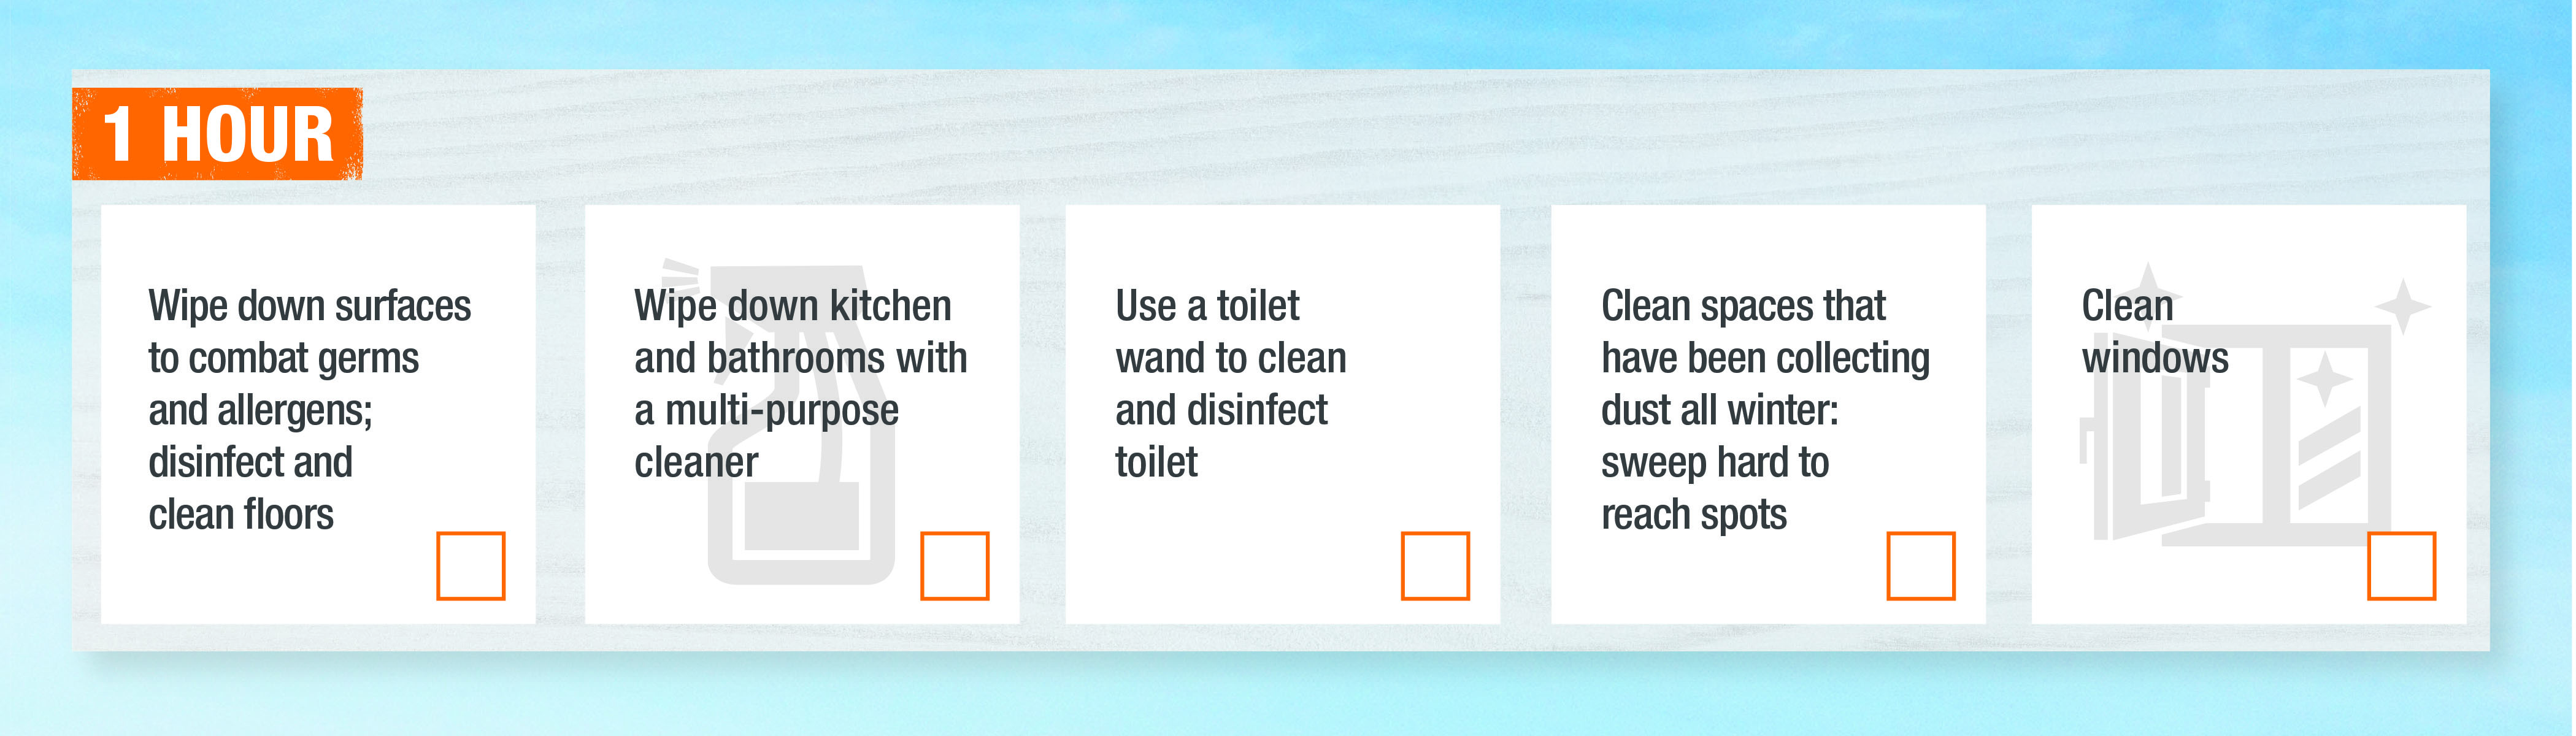 1 hour spring cleaning checklist